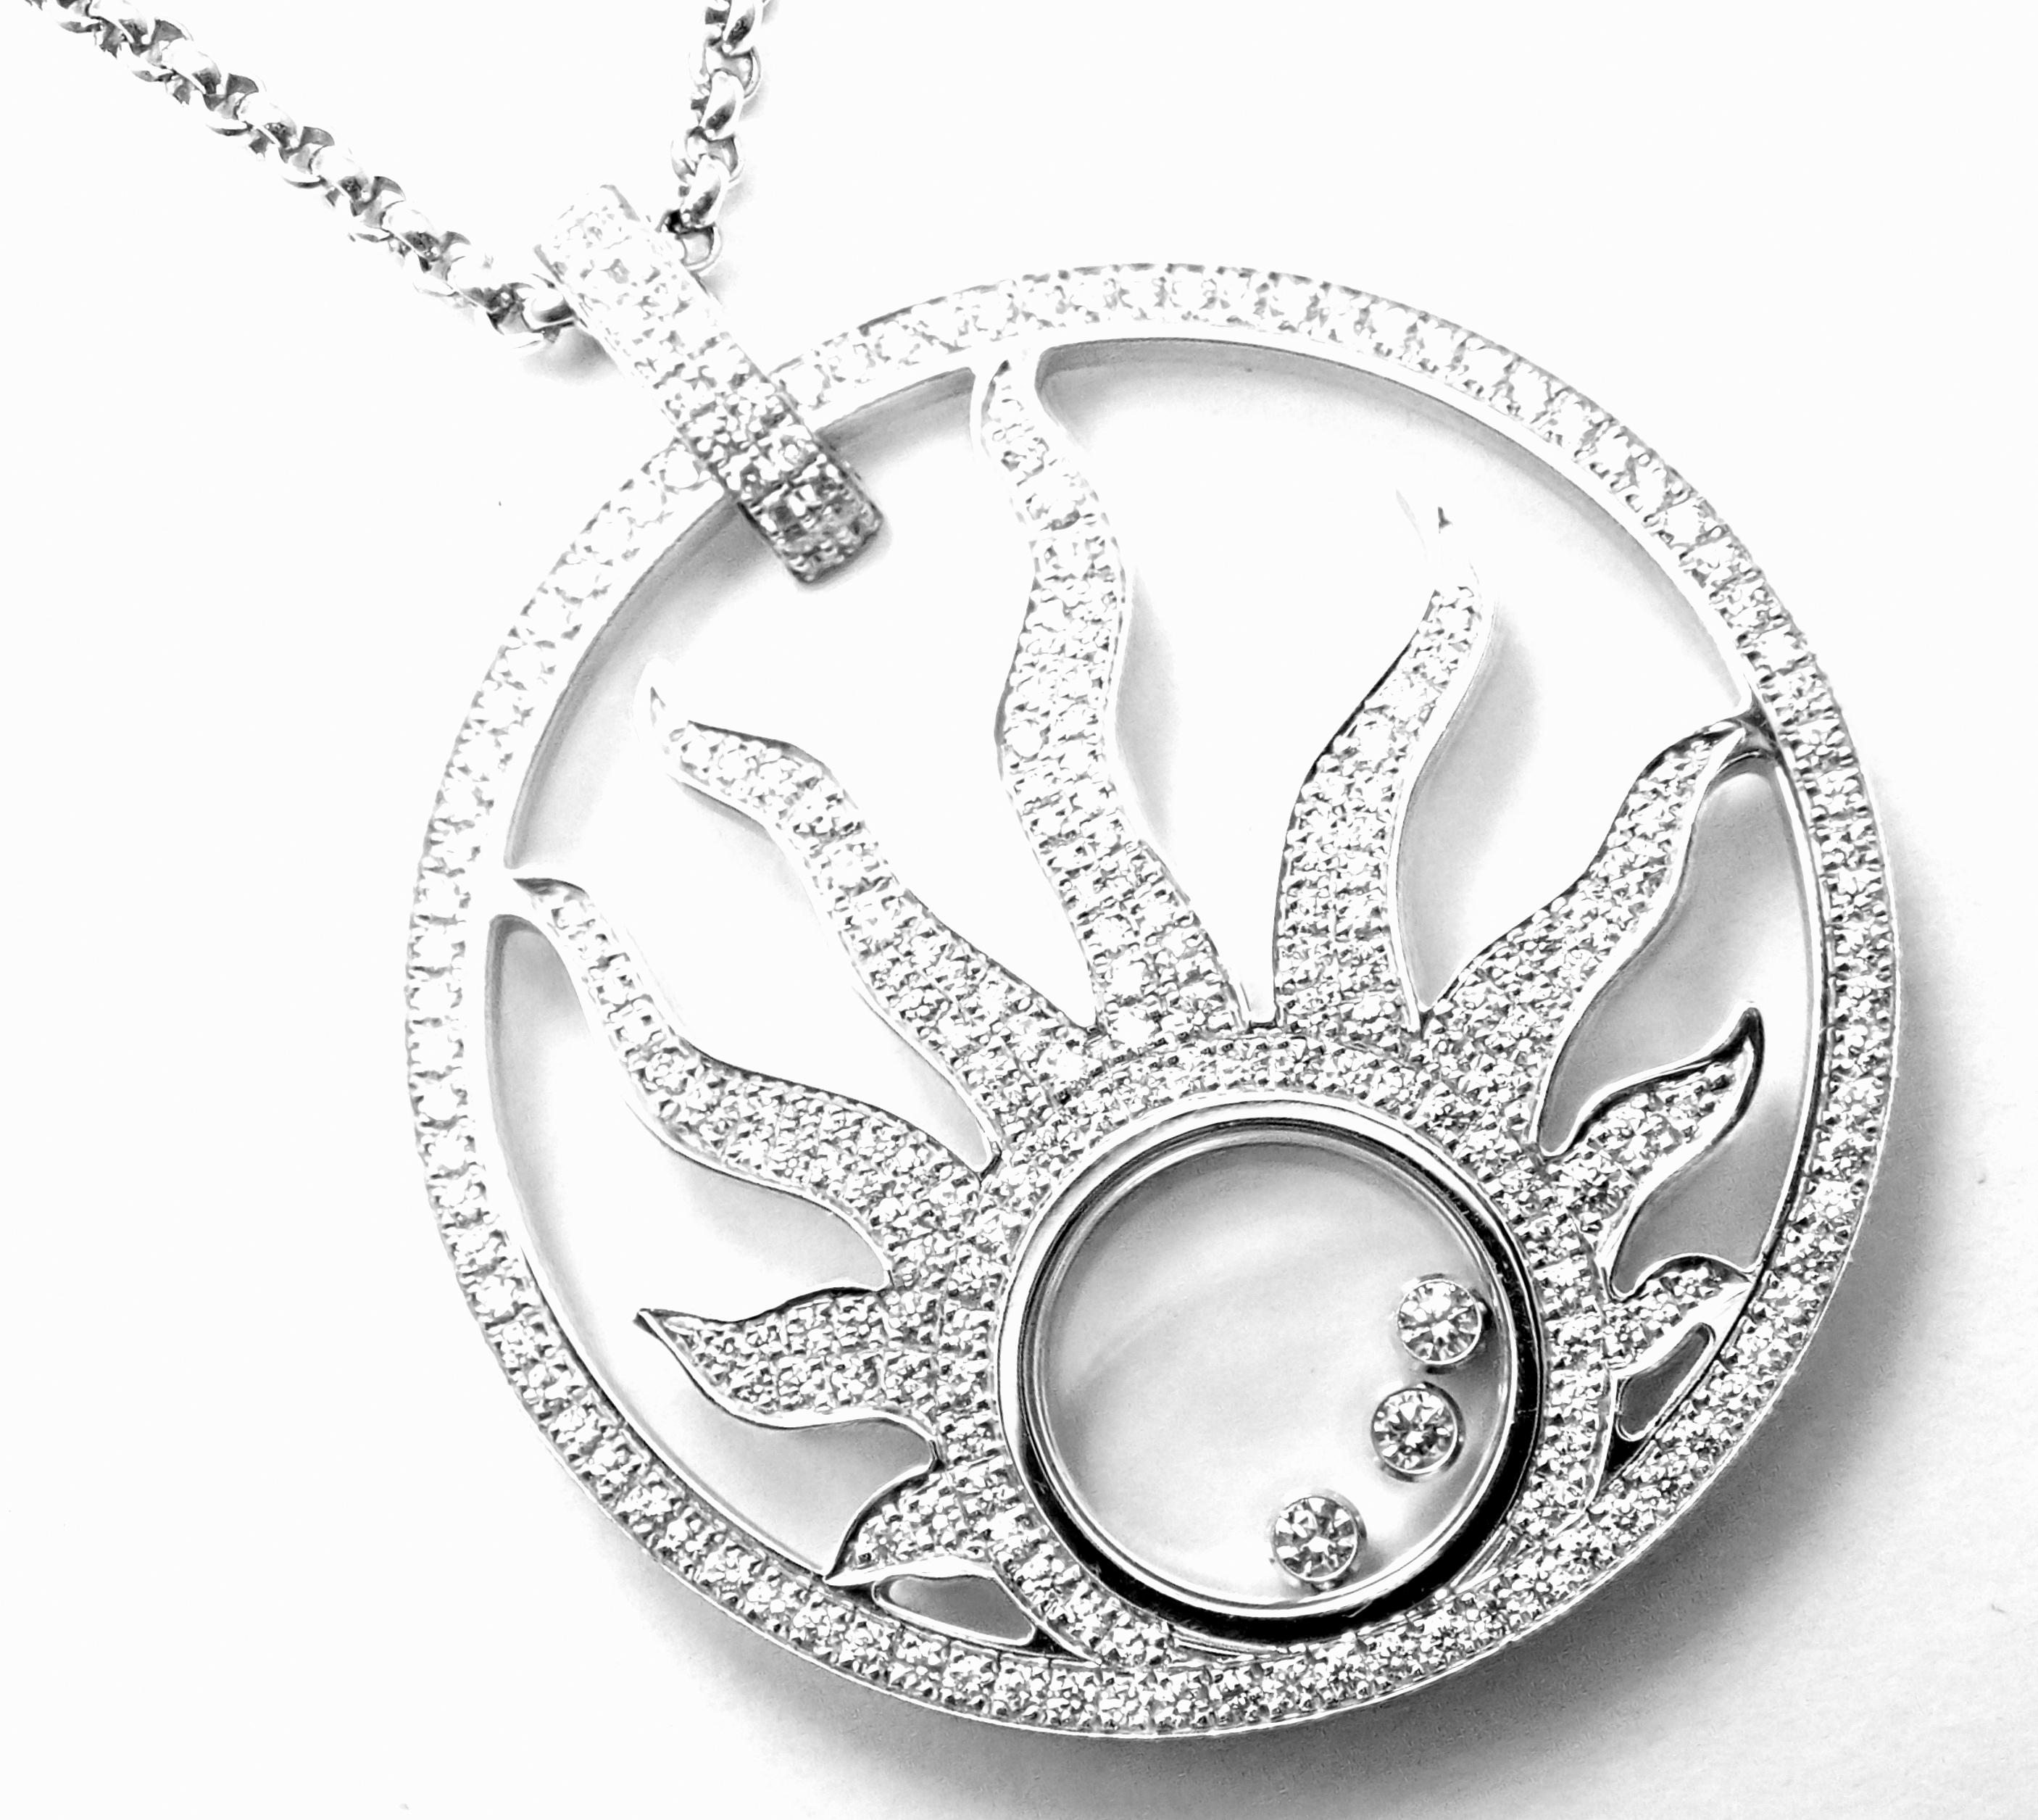 18k White Gold Happy Sun Diamond Large Pendant Necklace by Chopard. 
With Round Brilliant Diamonds = VS1 clarity, G color total weight 1.77ct
This necklace comes with Chopard box.
Details: 
Measurements:
Length: 16.5